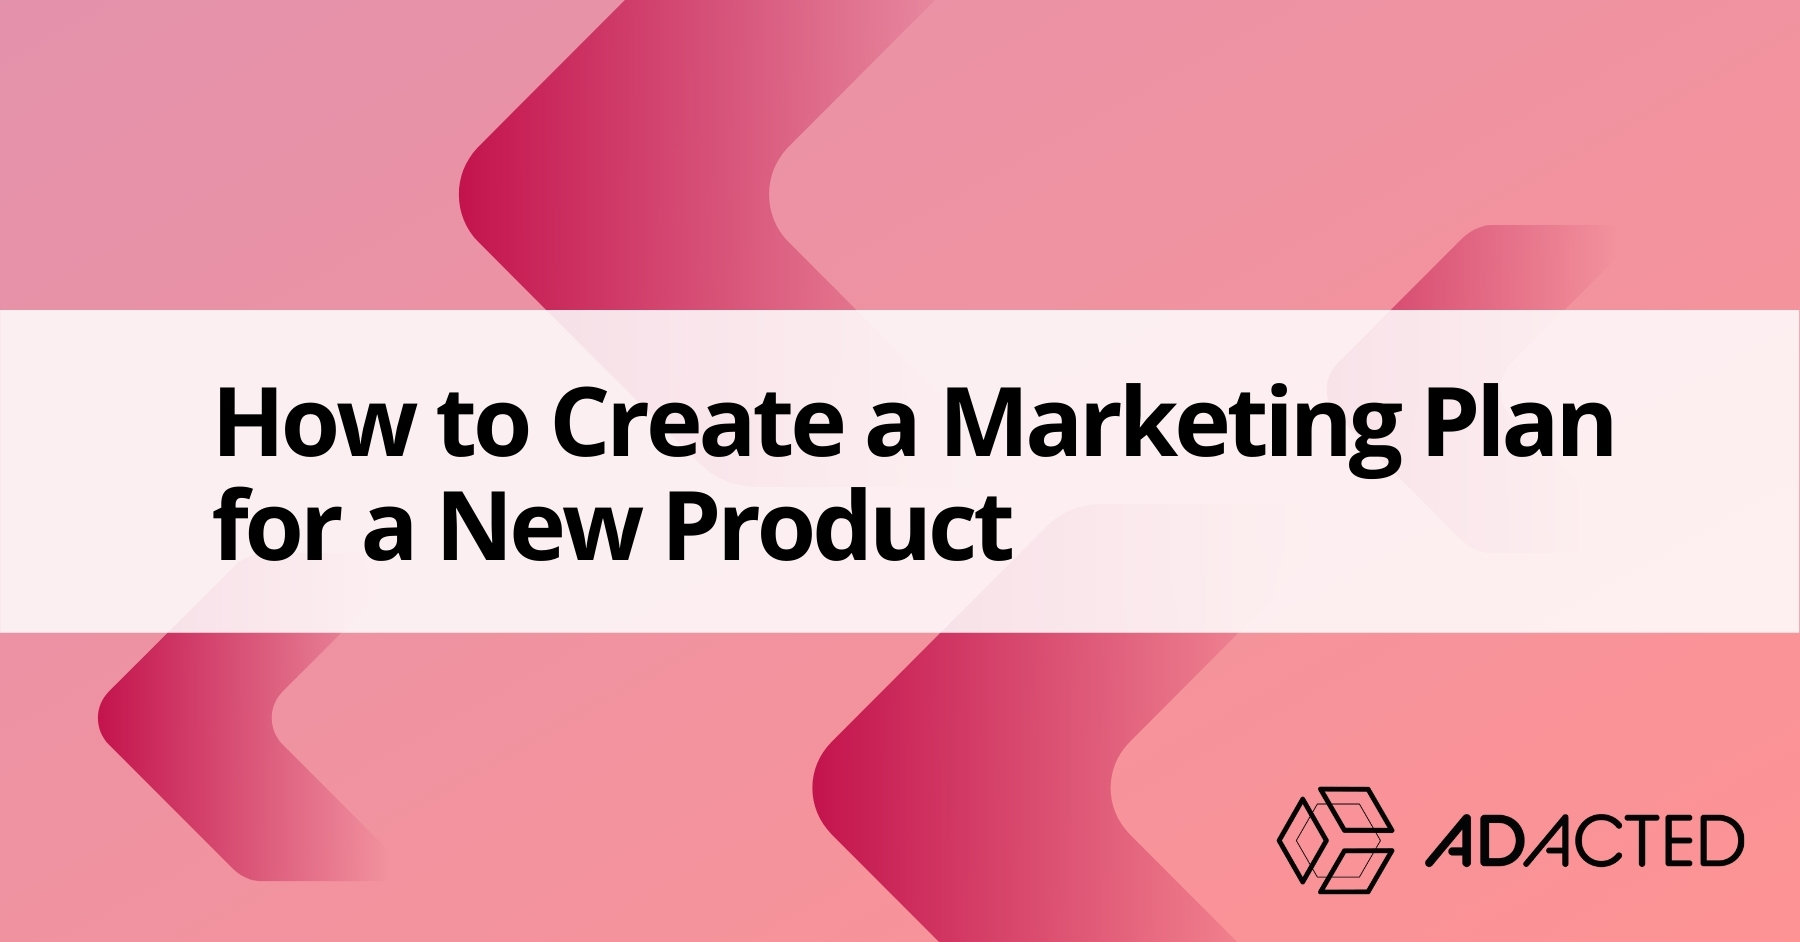 How to Create a Marketing Plan for a New Product (2022) - Adacted